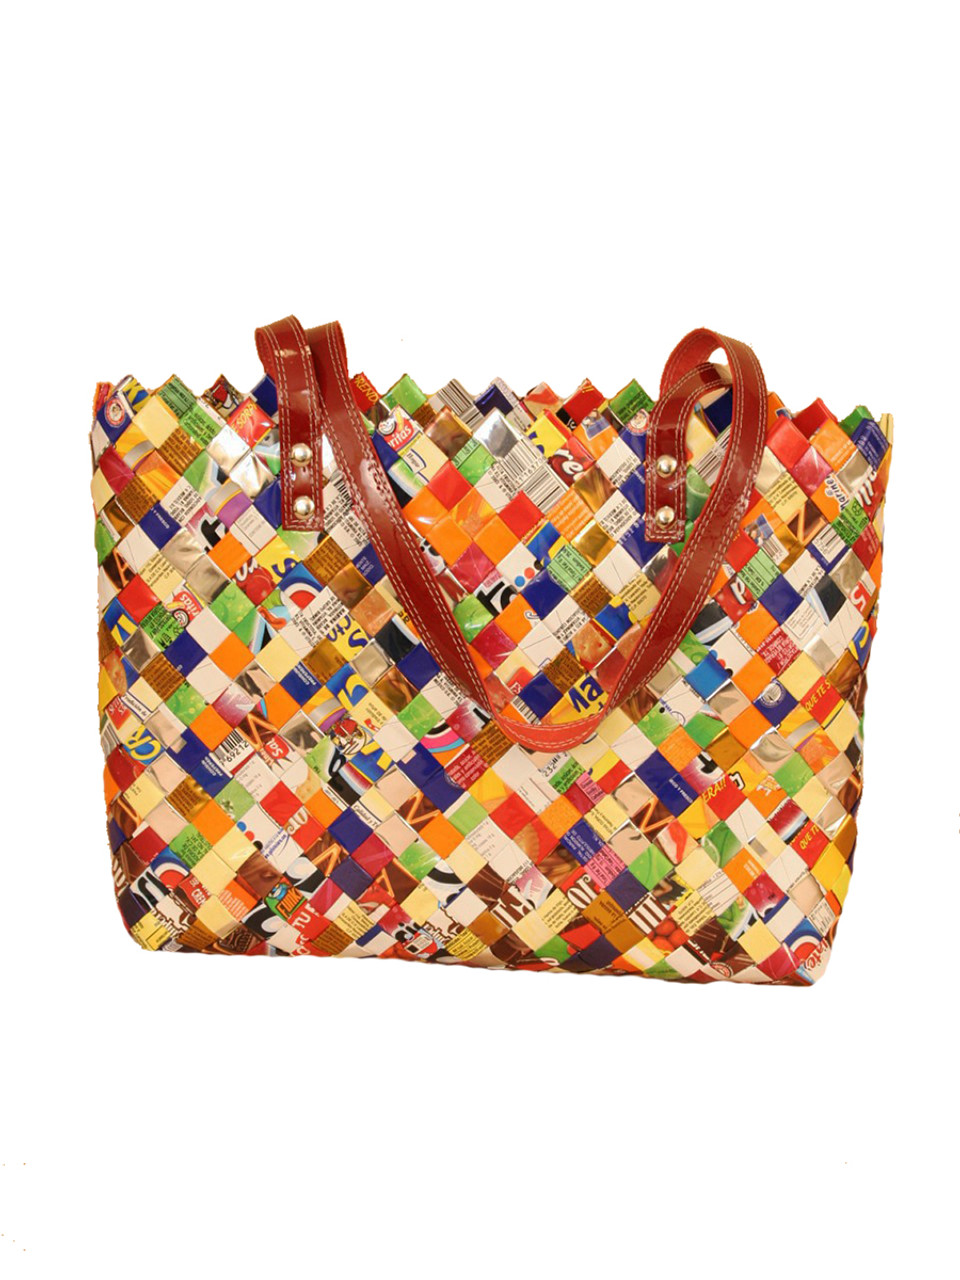 handbags made from recycled materials